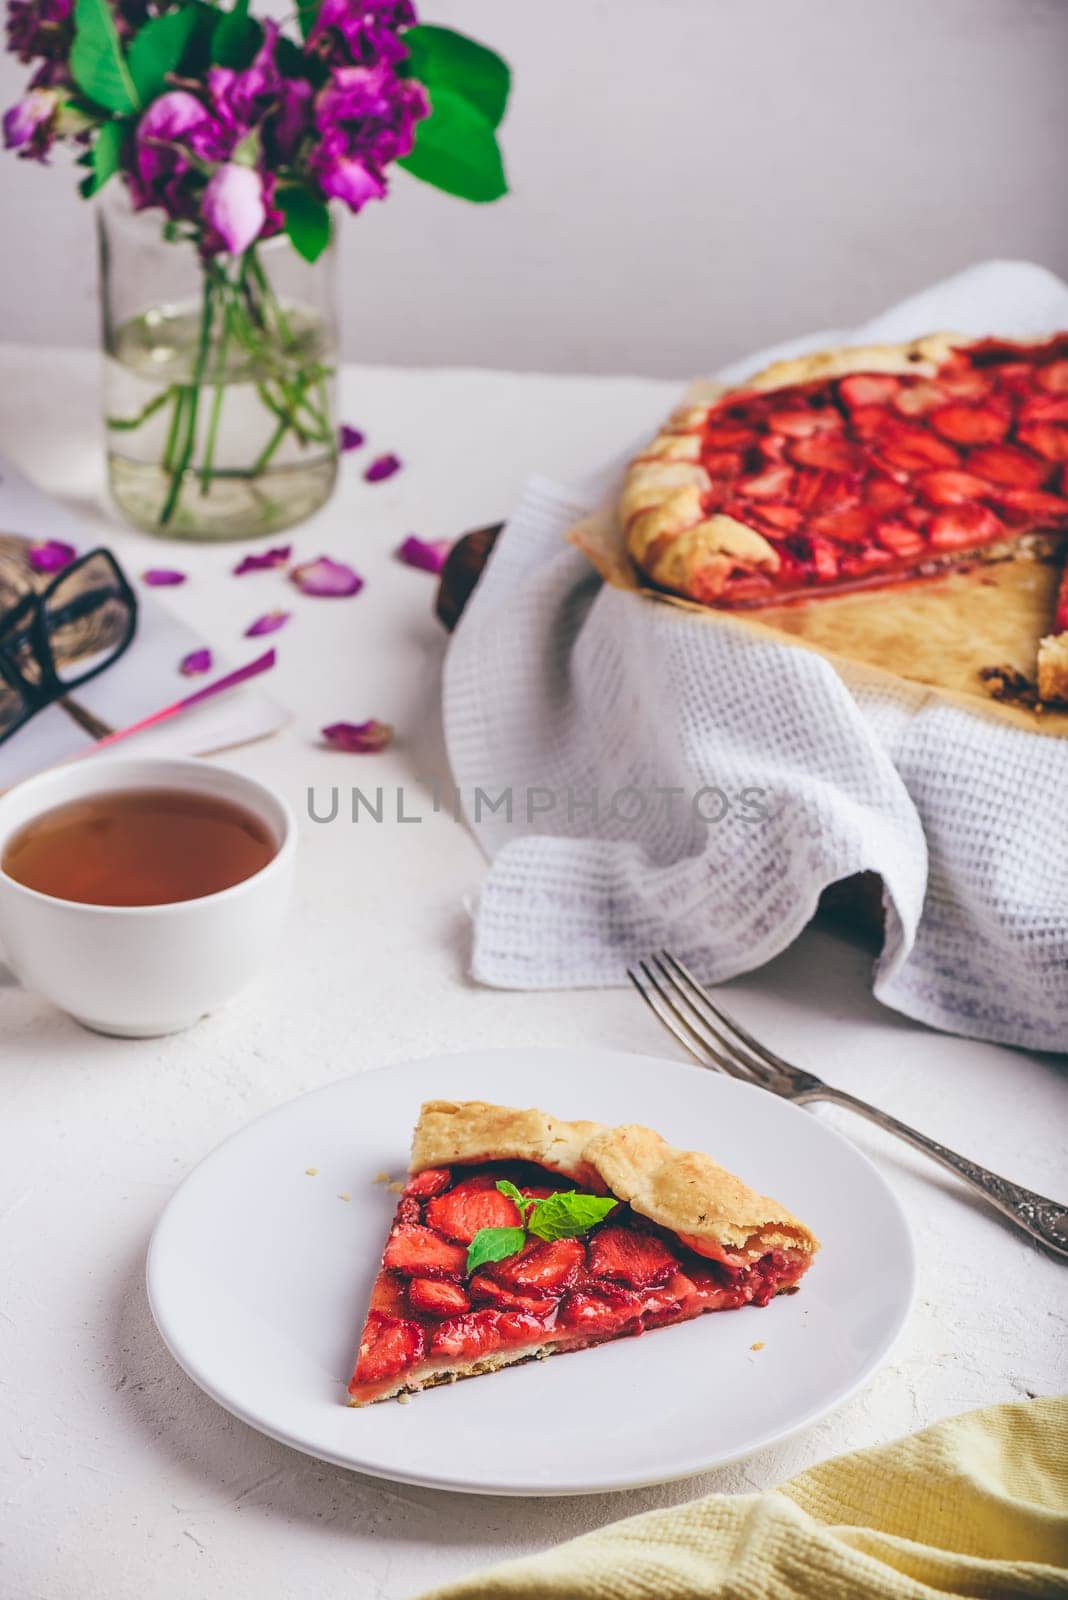 Slice Of Sweet Fresh Baked Strawberry Galette With Mint Leaves On White Plate